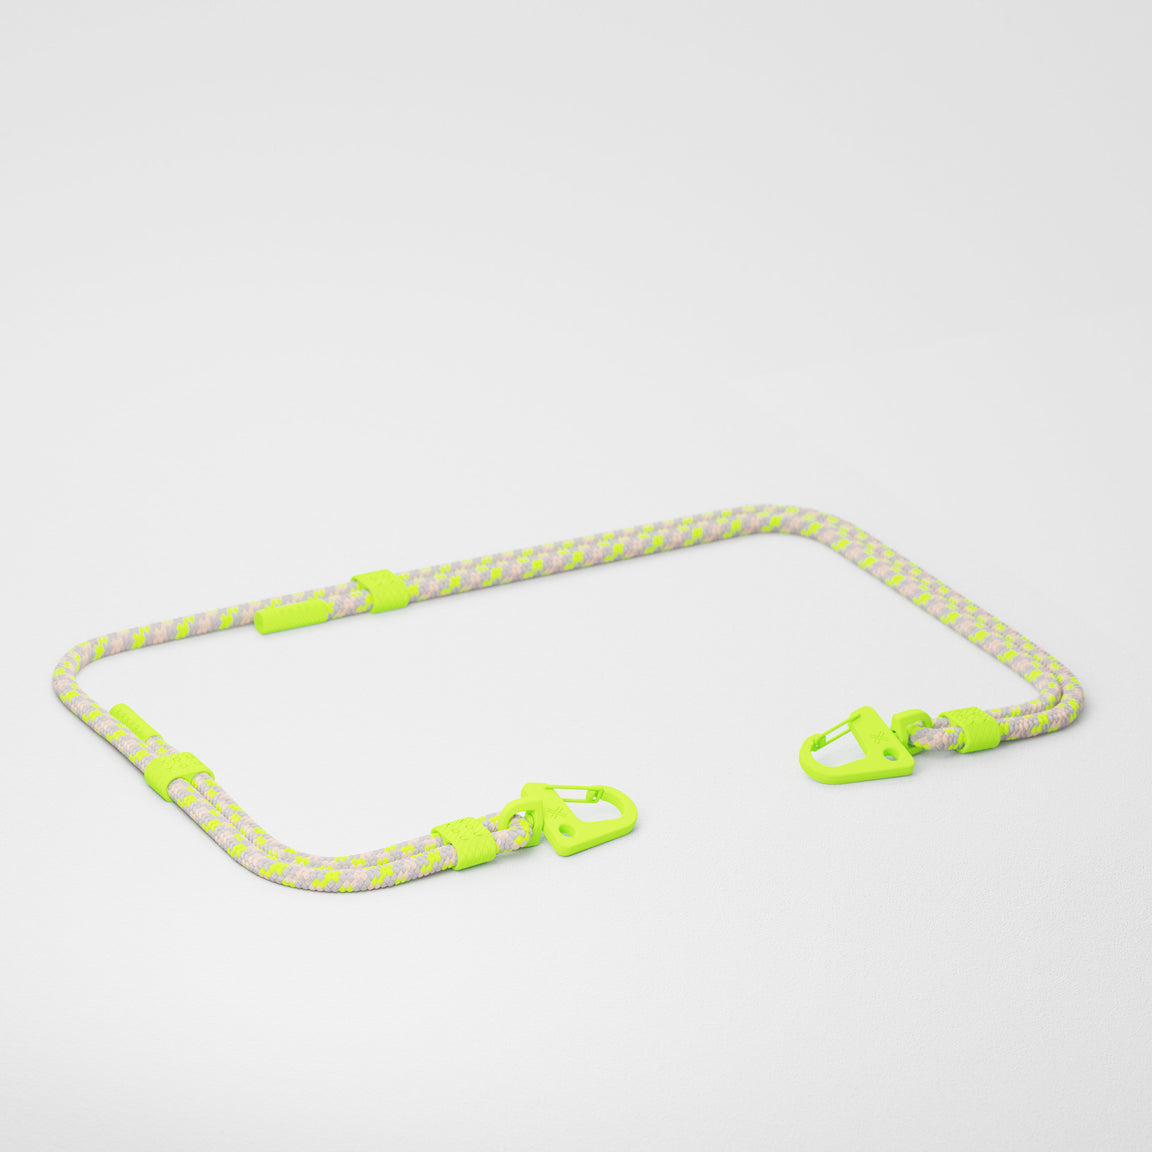 Neon Camouflage Carabiner Rope